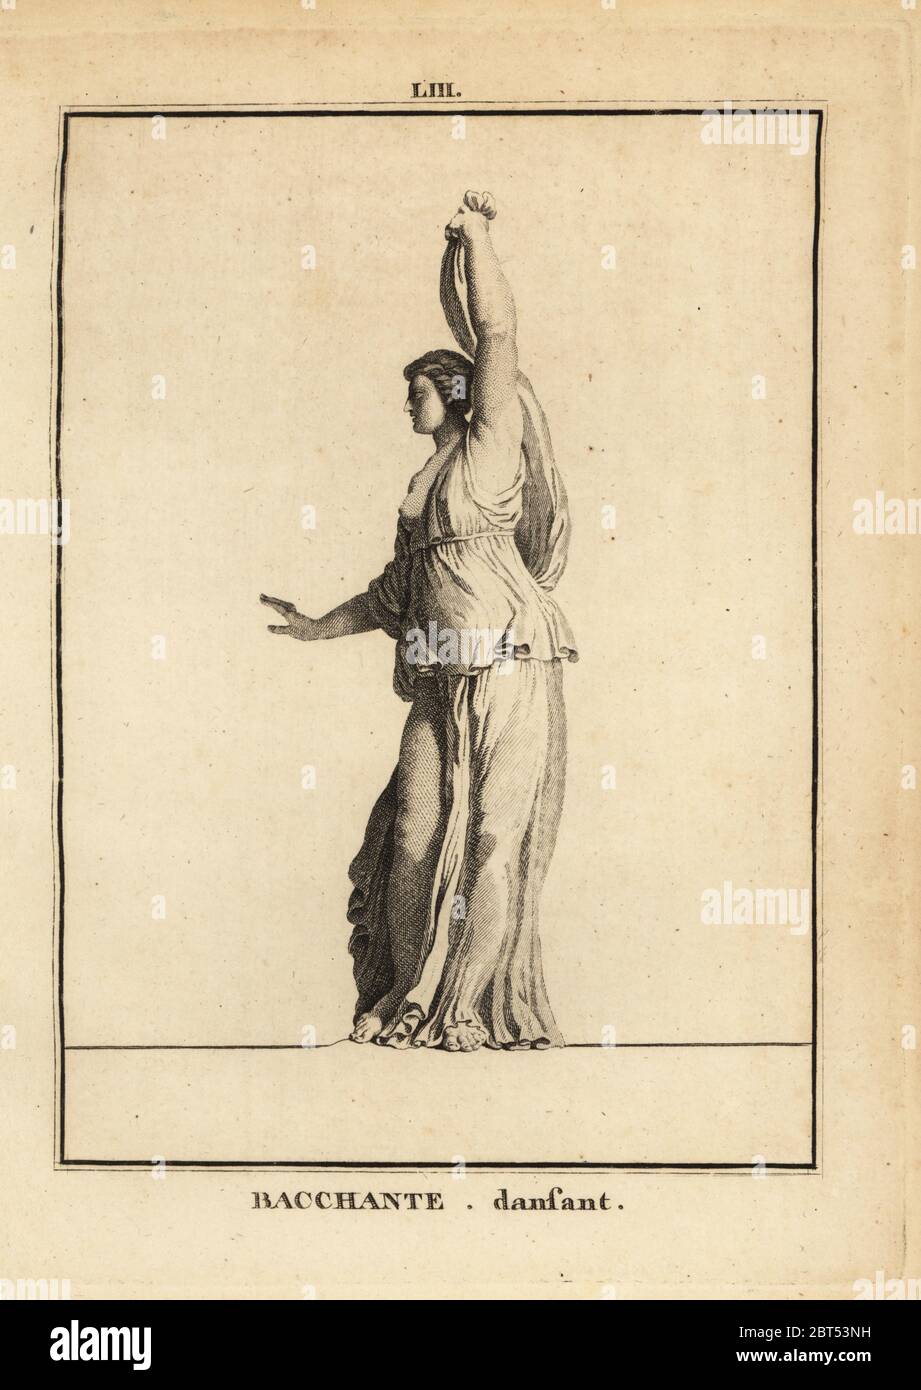 Statue of a dancing Bacchante, follower of the Roman god of wine Bacchus. Copperplate engraving by Francois-Anne David from Museum de Florence, ou Collection des Pierres Gravees, Statues, Medailles, Chez F.A. David, Paris, 1787. David (1741-1824) drew and engraved the illustrations based on Roman statues, engraved stones and medals in the collection of the Museum de Florence and the cabinet of curiosities of the Grand Duke of Tuscany. Stock Photo